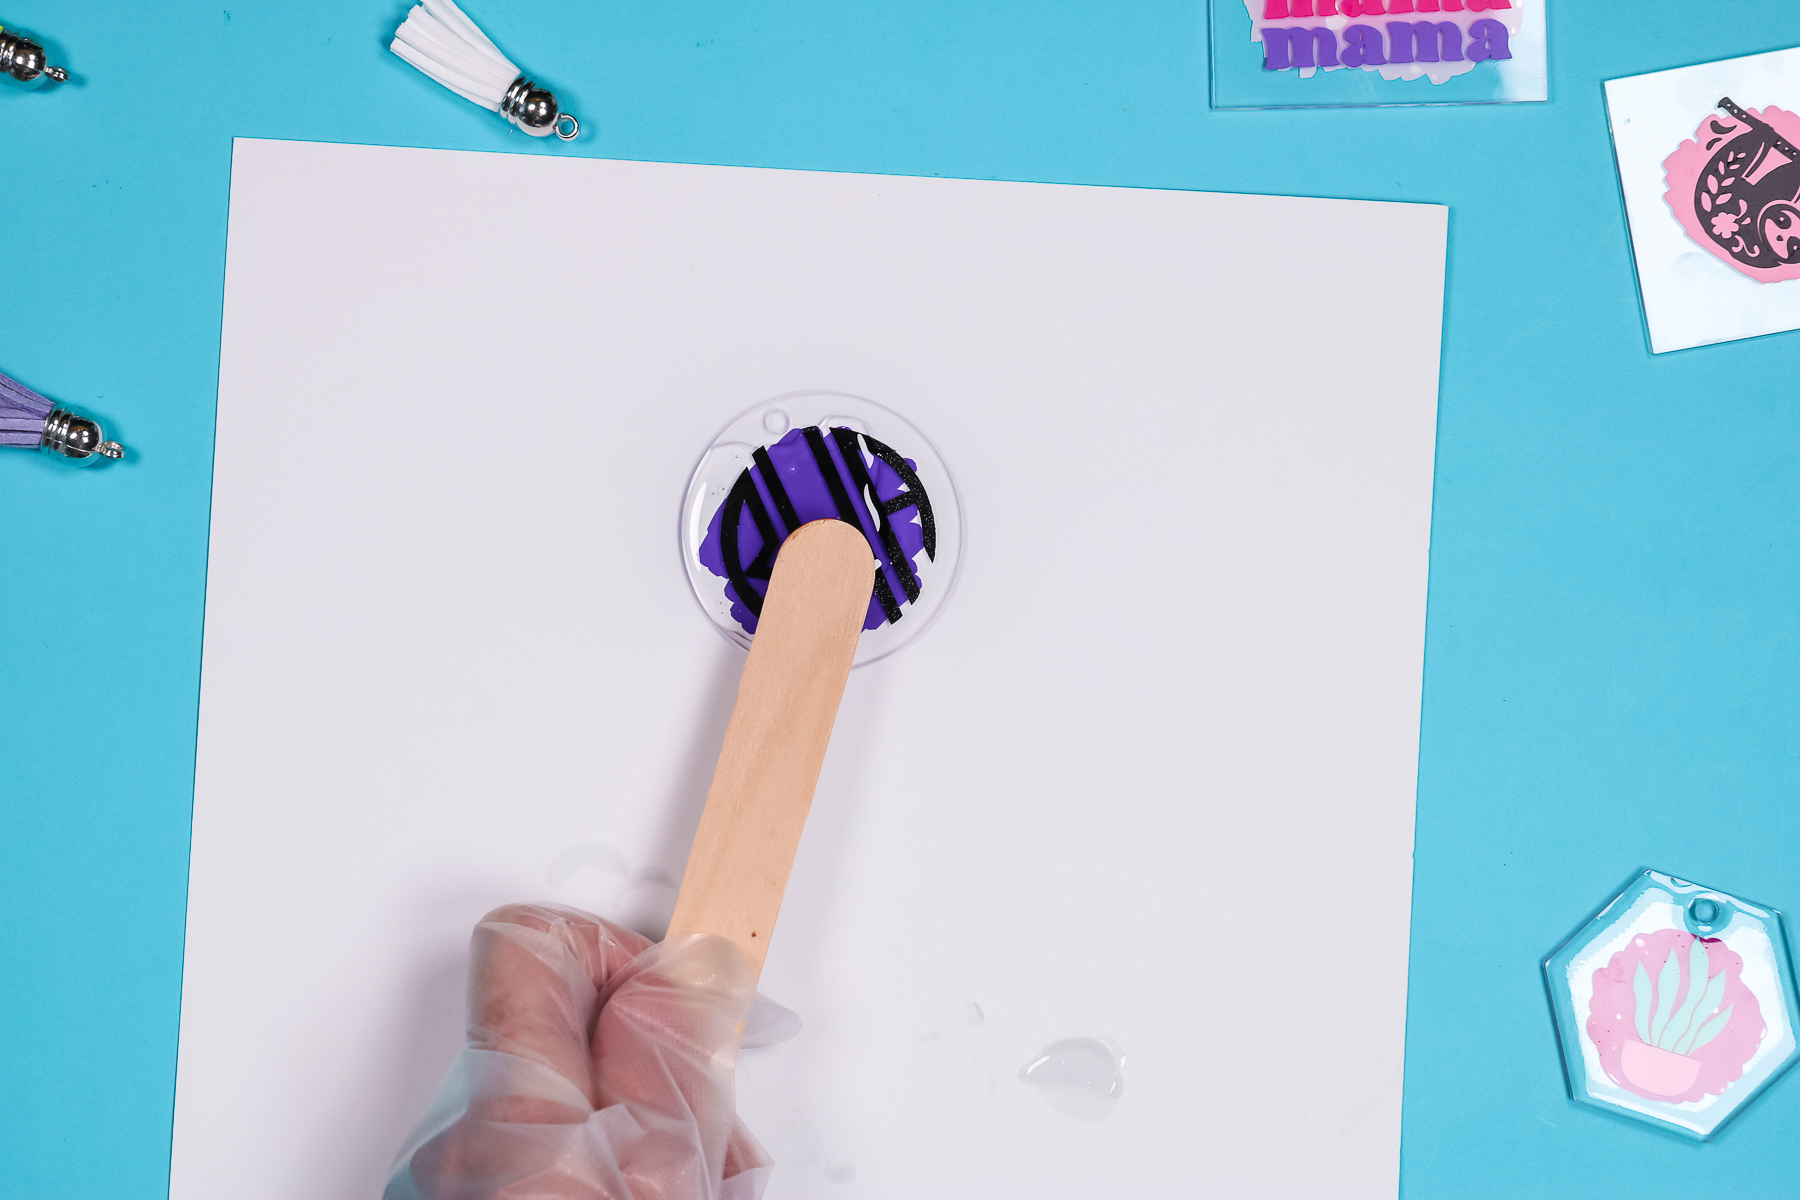 Use an ice cream stick to transfer the UV resin.